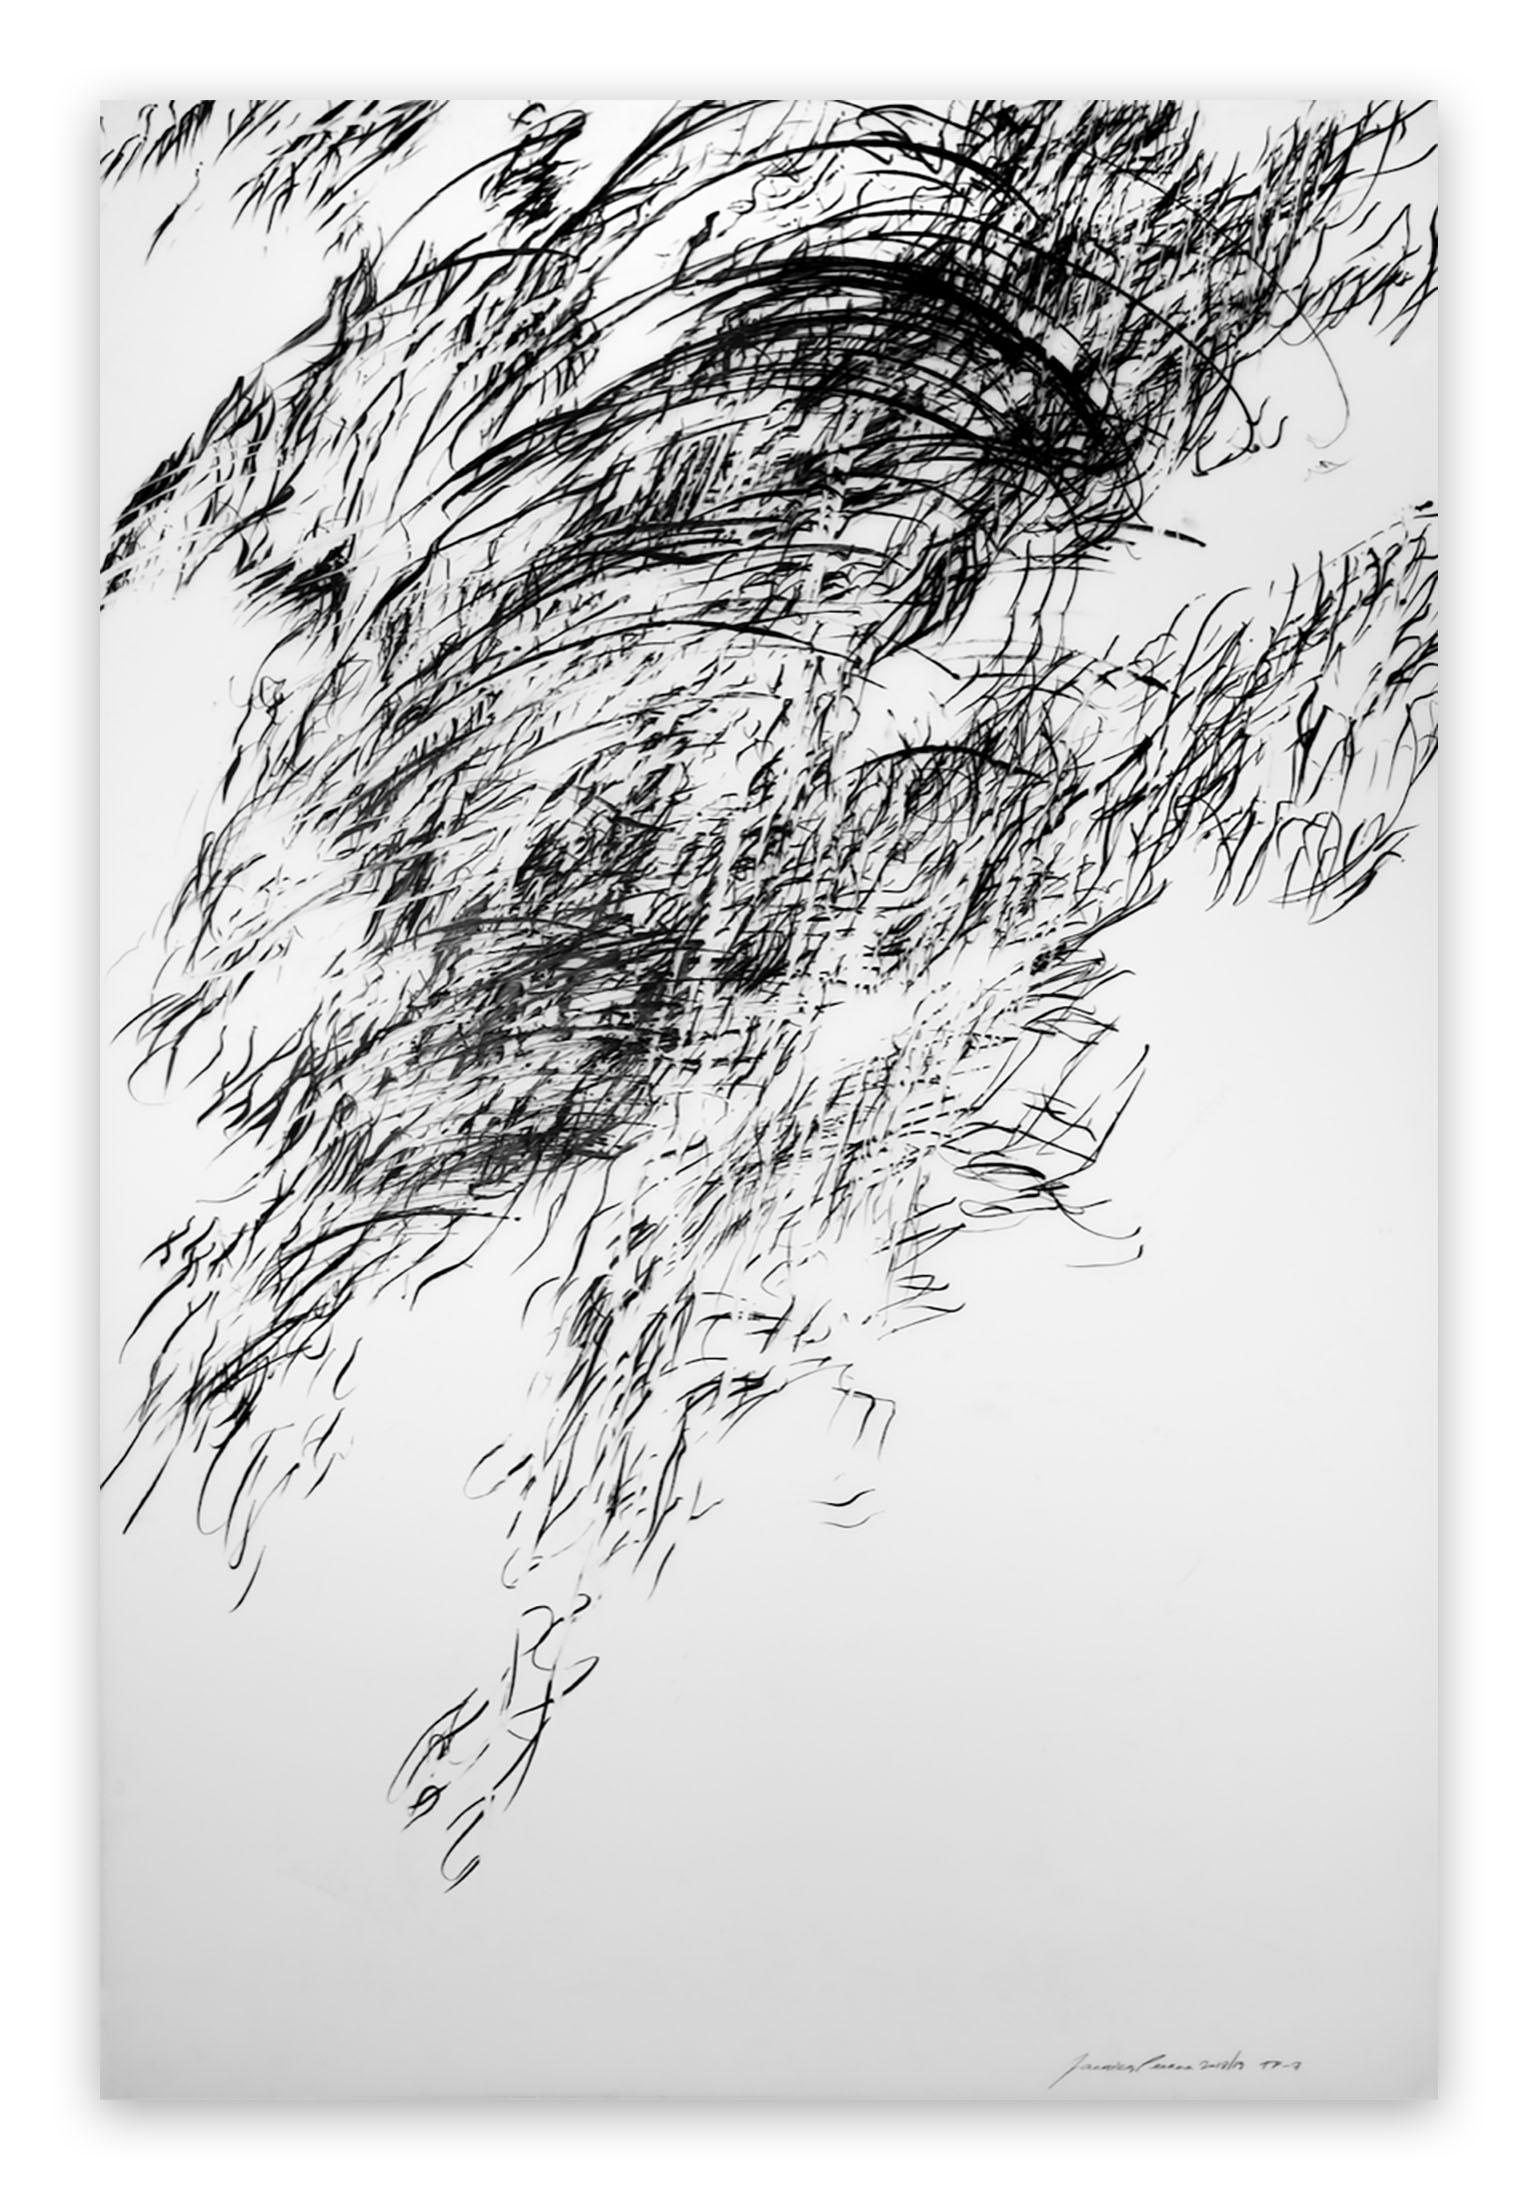 Jaanika Peerna Abstract Painting - Tipping Point #7 (Abstract drawing)